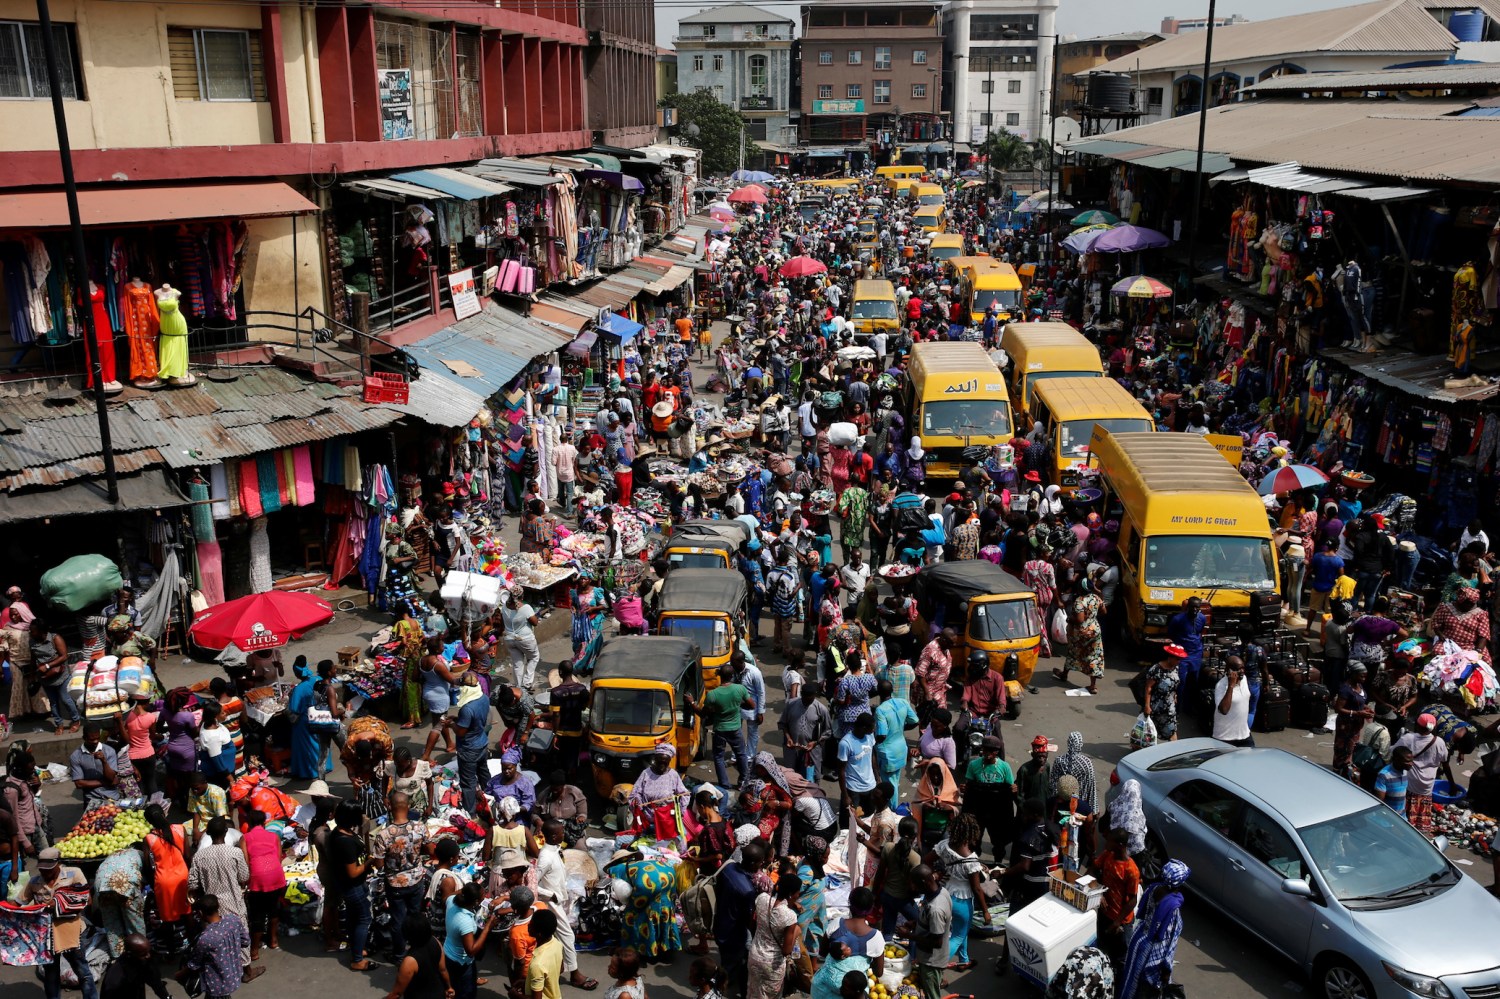 People crowd a street at the central business district in Nigeria's commercial capital Lagos ahead of Christmas December 23, 2016. REUTERS/Akintunde Akinleye - RC1EAB06DED0